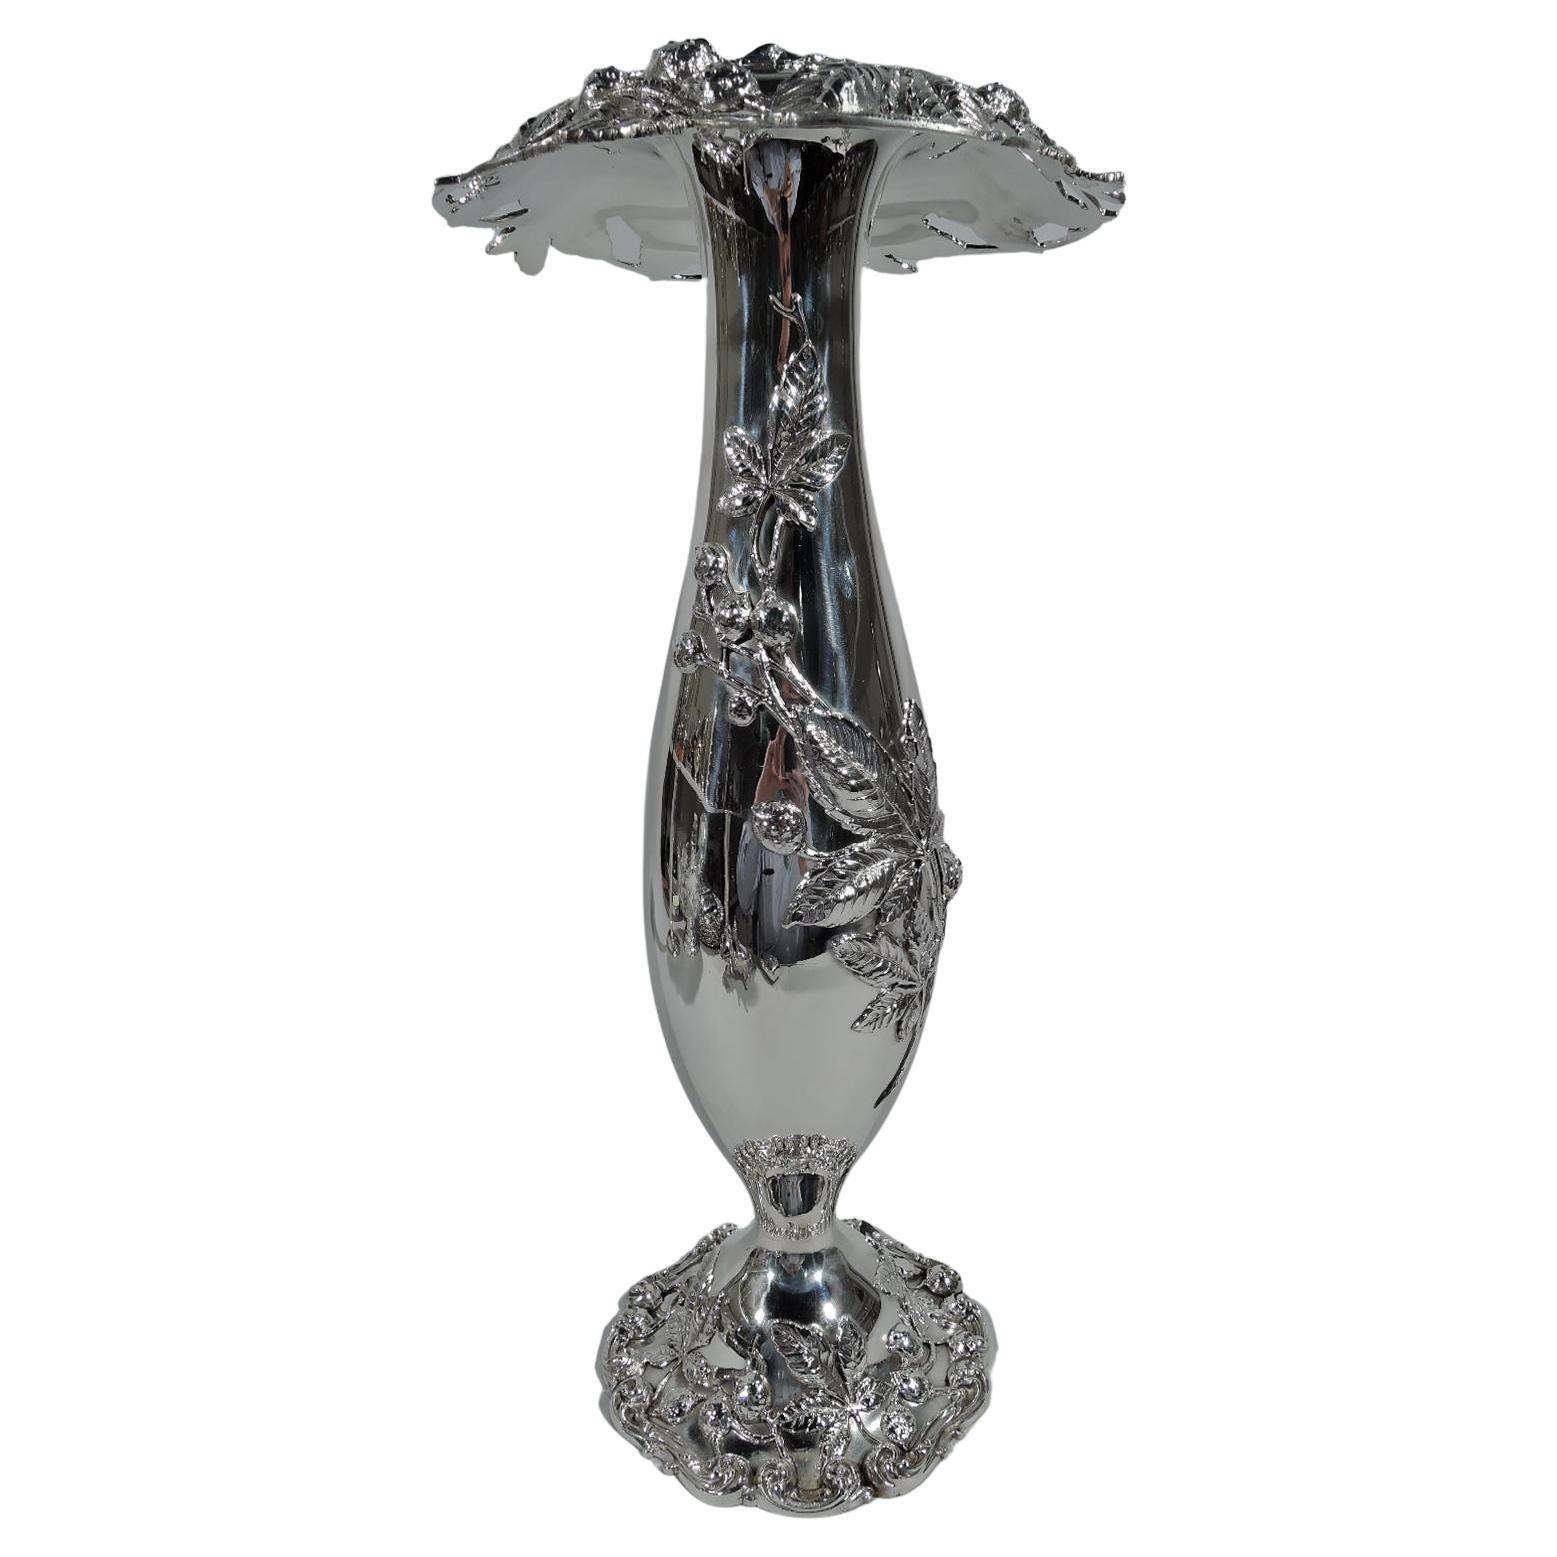 Tall and Fancy Antique Art Nouveau Sterling Silver Vase by Kerr